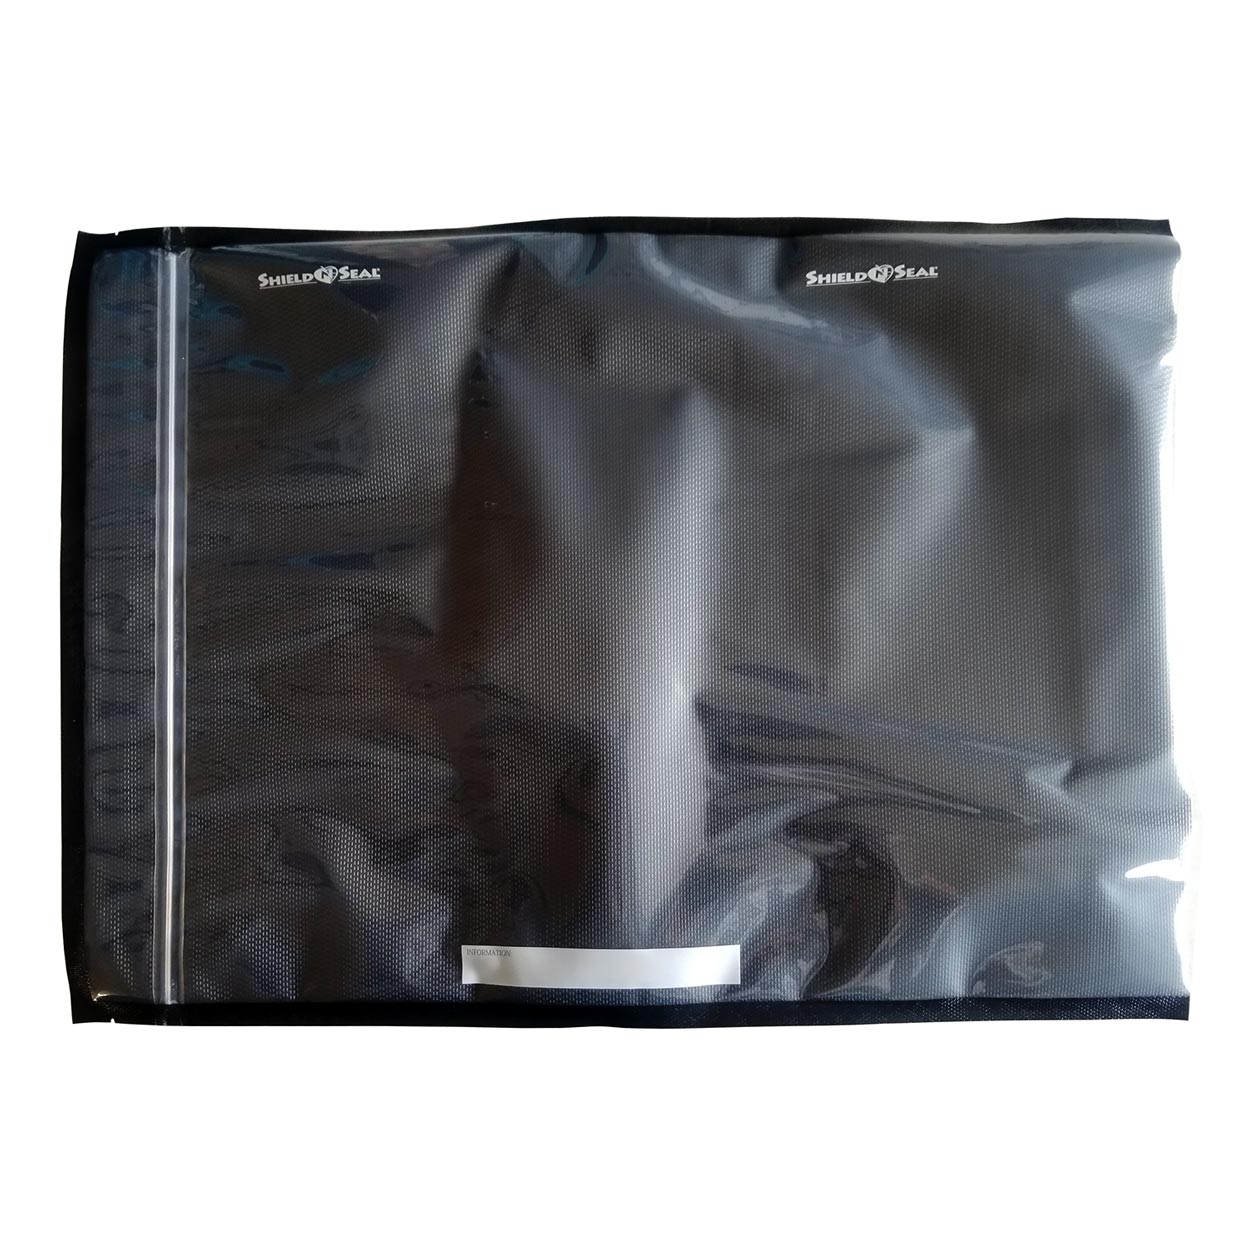 15 x 20 Black and Clear Vacuum Seal Bags With Zipper SNS 3500